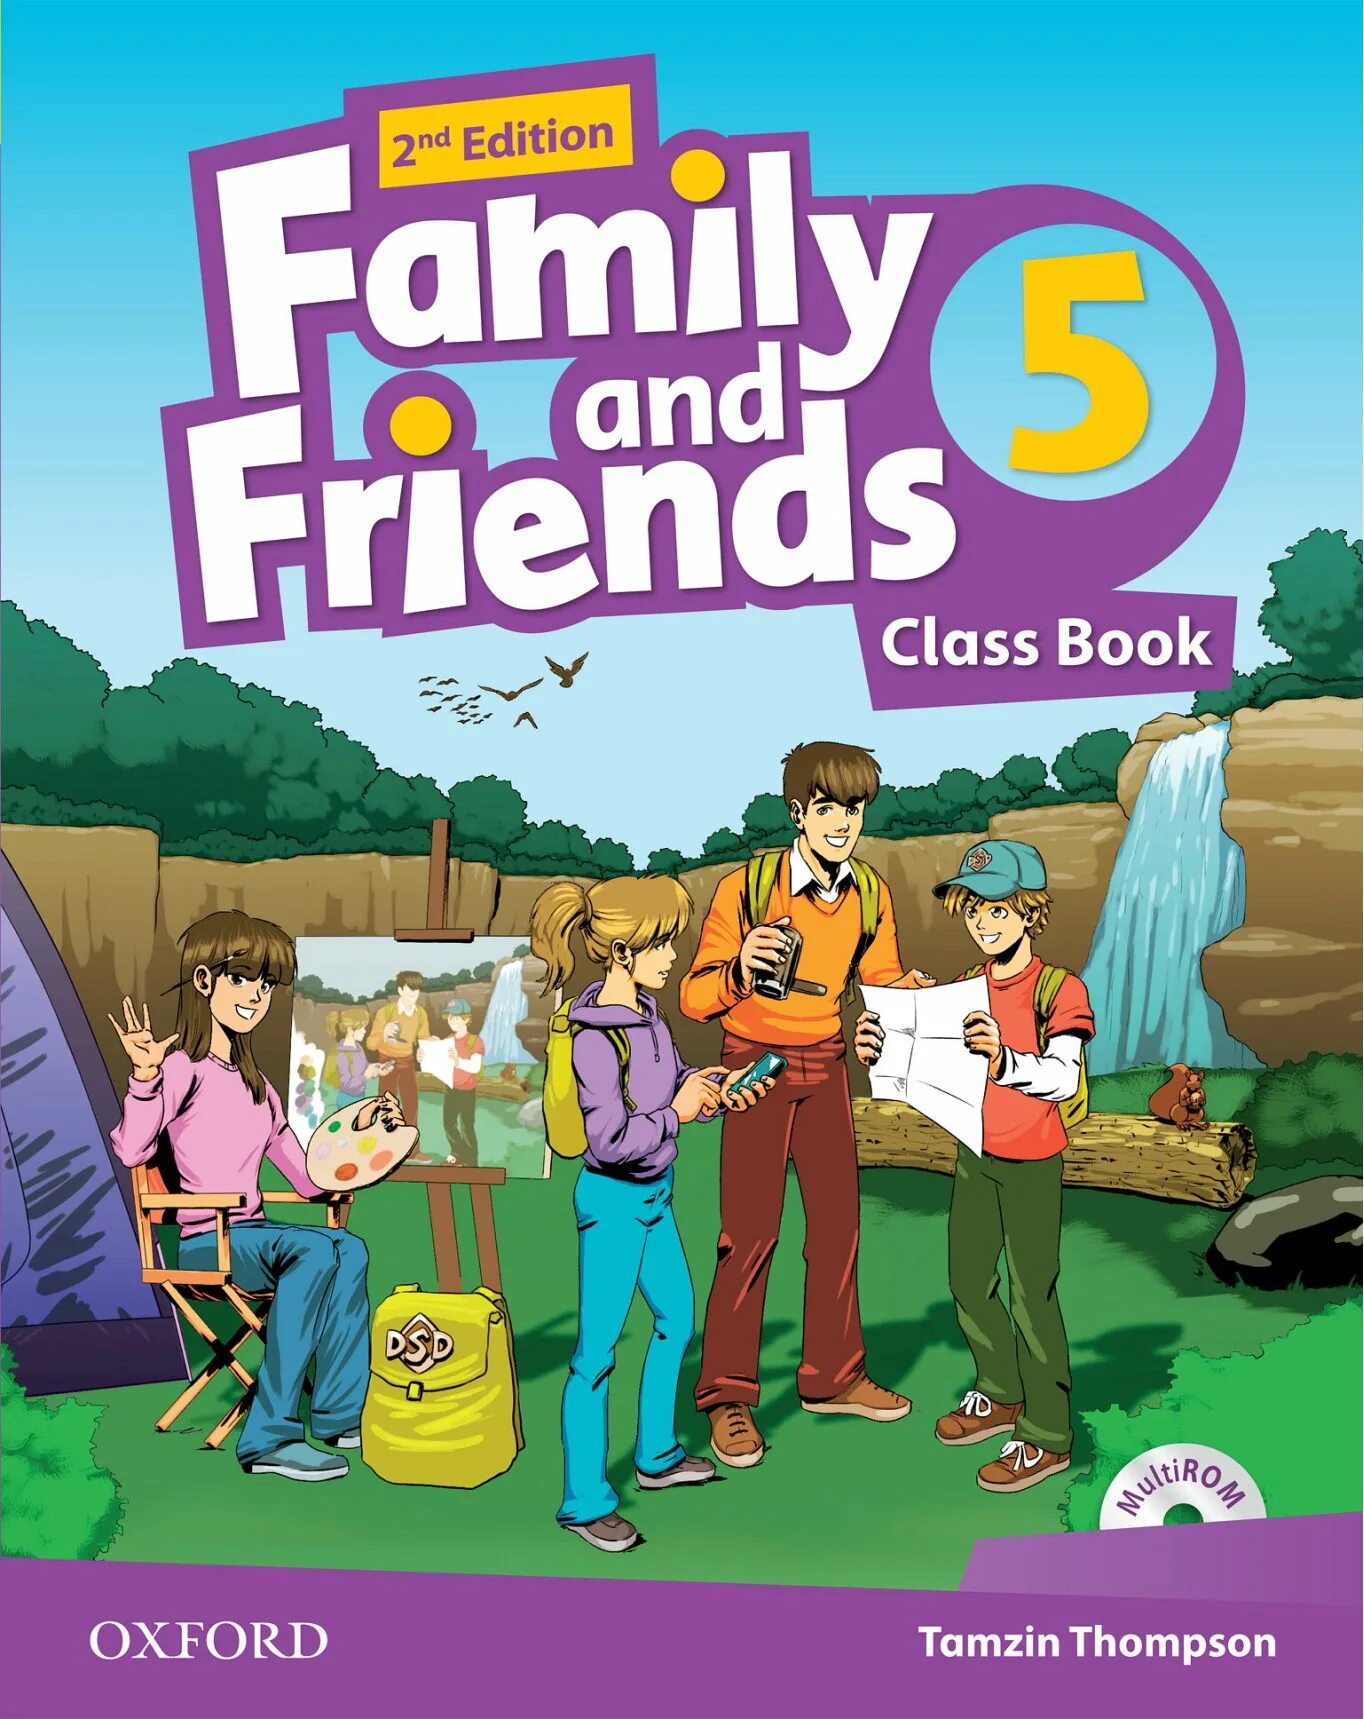 Family and friends students book. Учебник Family and friends 5. Фэмили френдс 6. \Фэмили энд френдс 2 издание. Family and friends 3 2nd Edition.